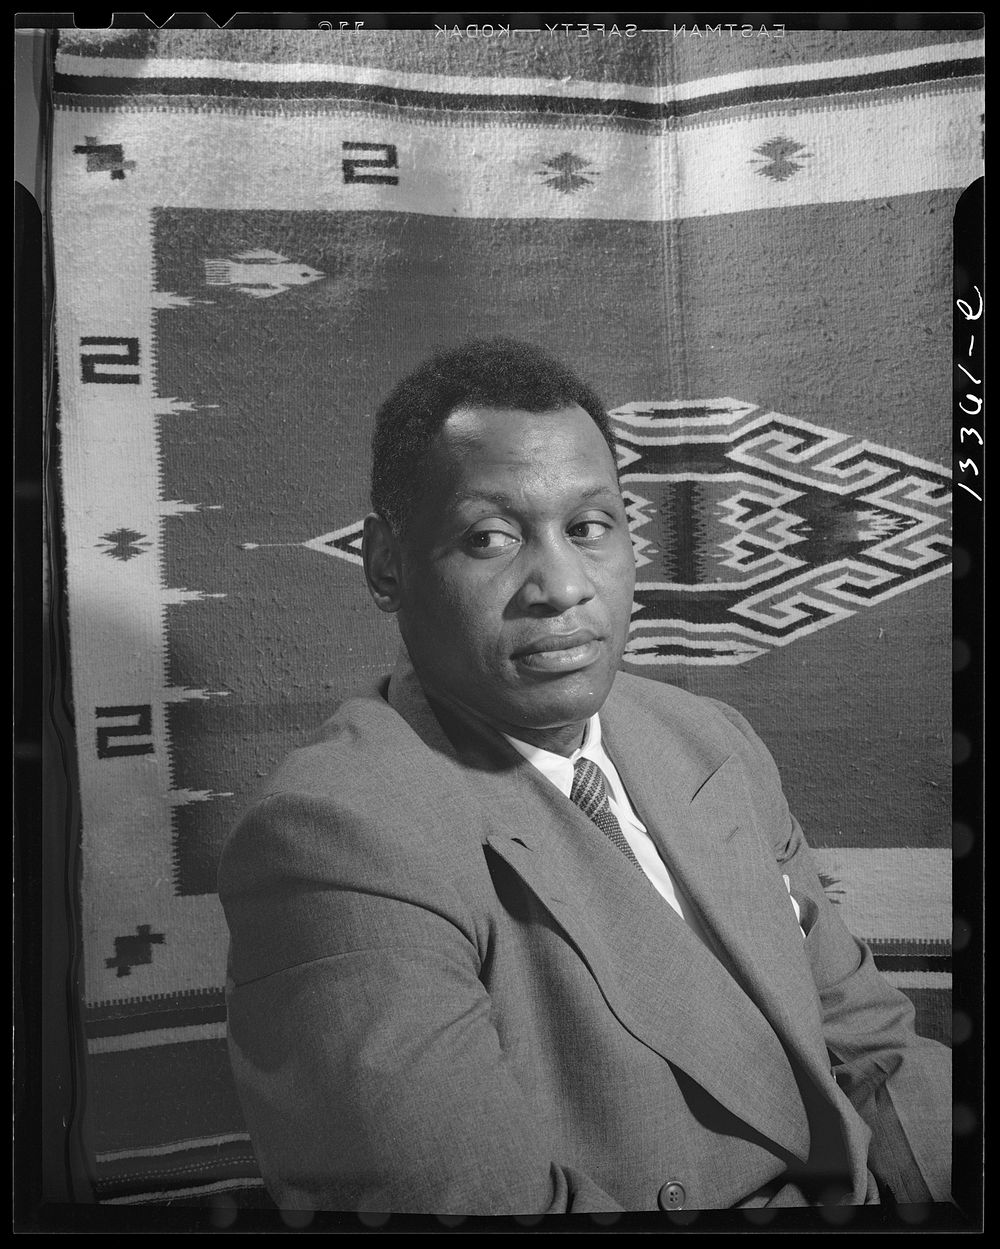 Washington, D.C. Paul Robeson, baritone. Sourced from the Library of Congress.